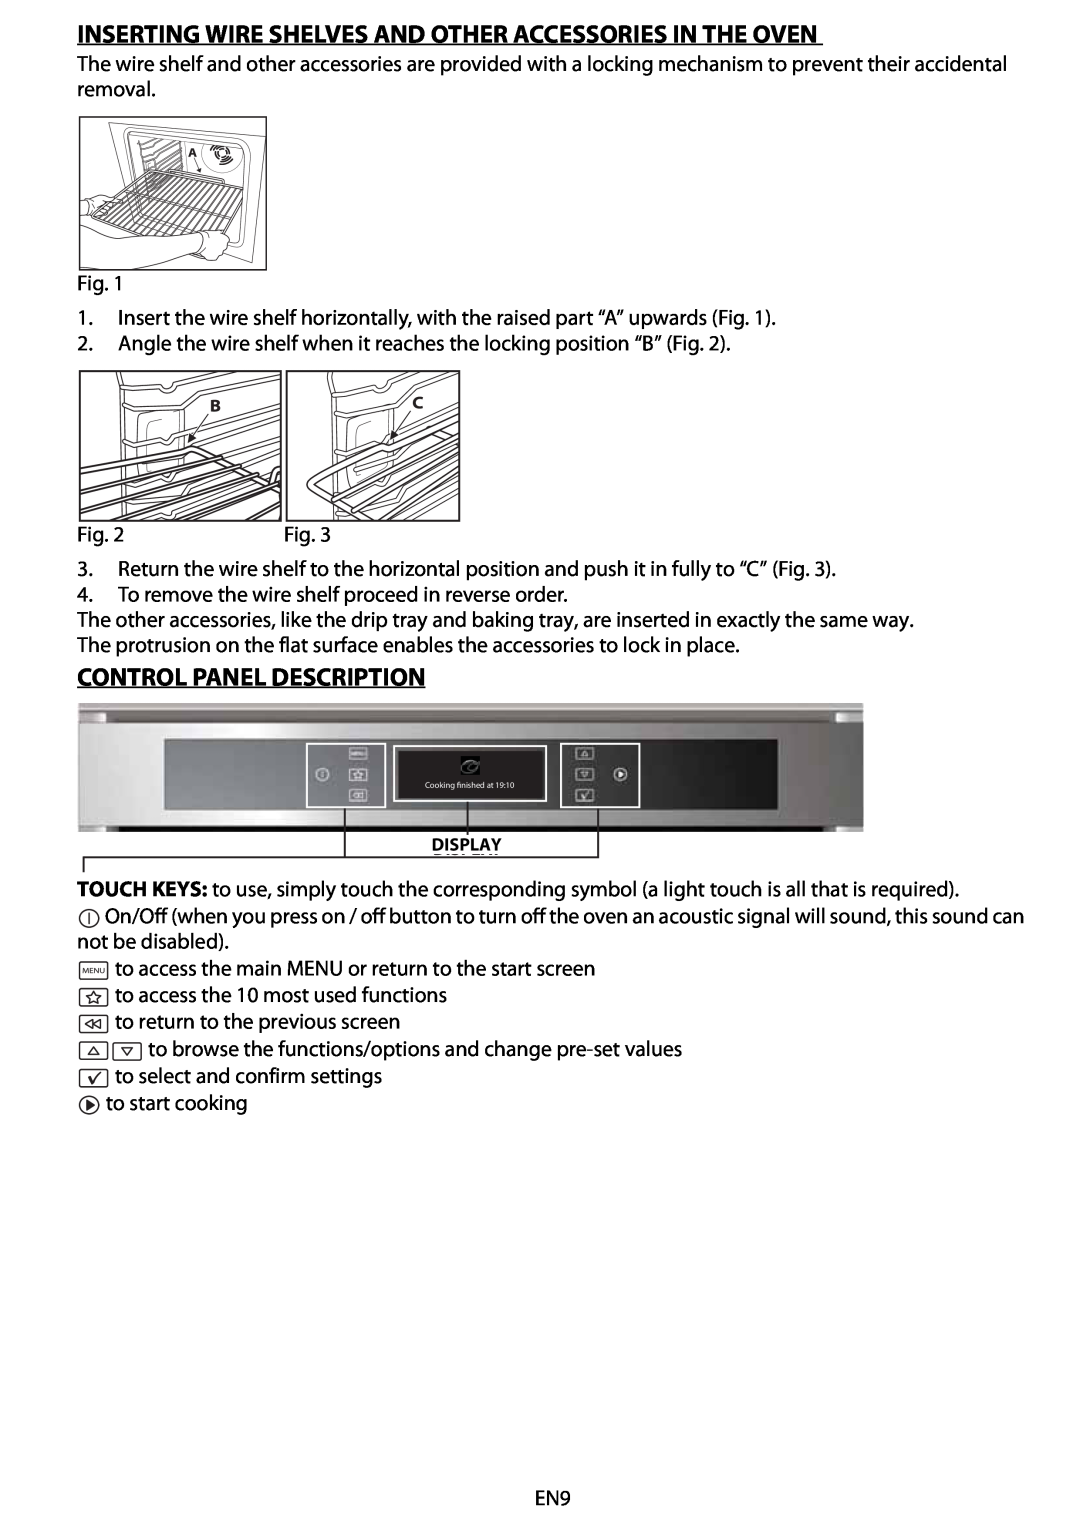 Whirlpool AKZM 6560 manual Inserting Wire Shelves And Other Accessories In The Oven, Control Panel Description 